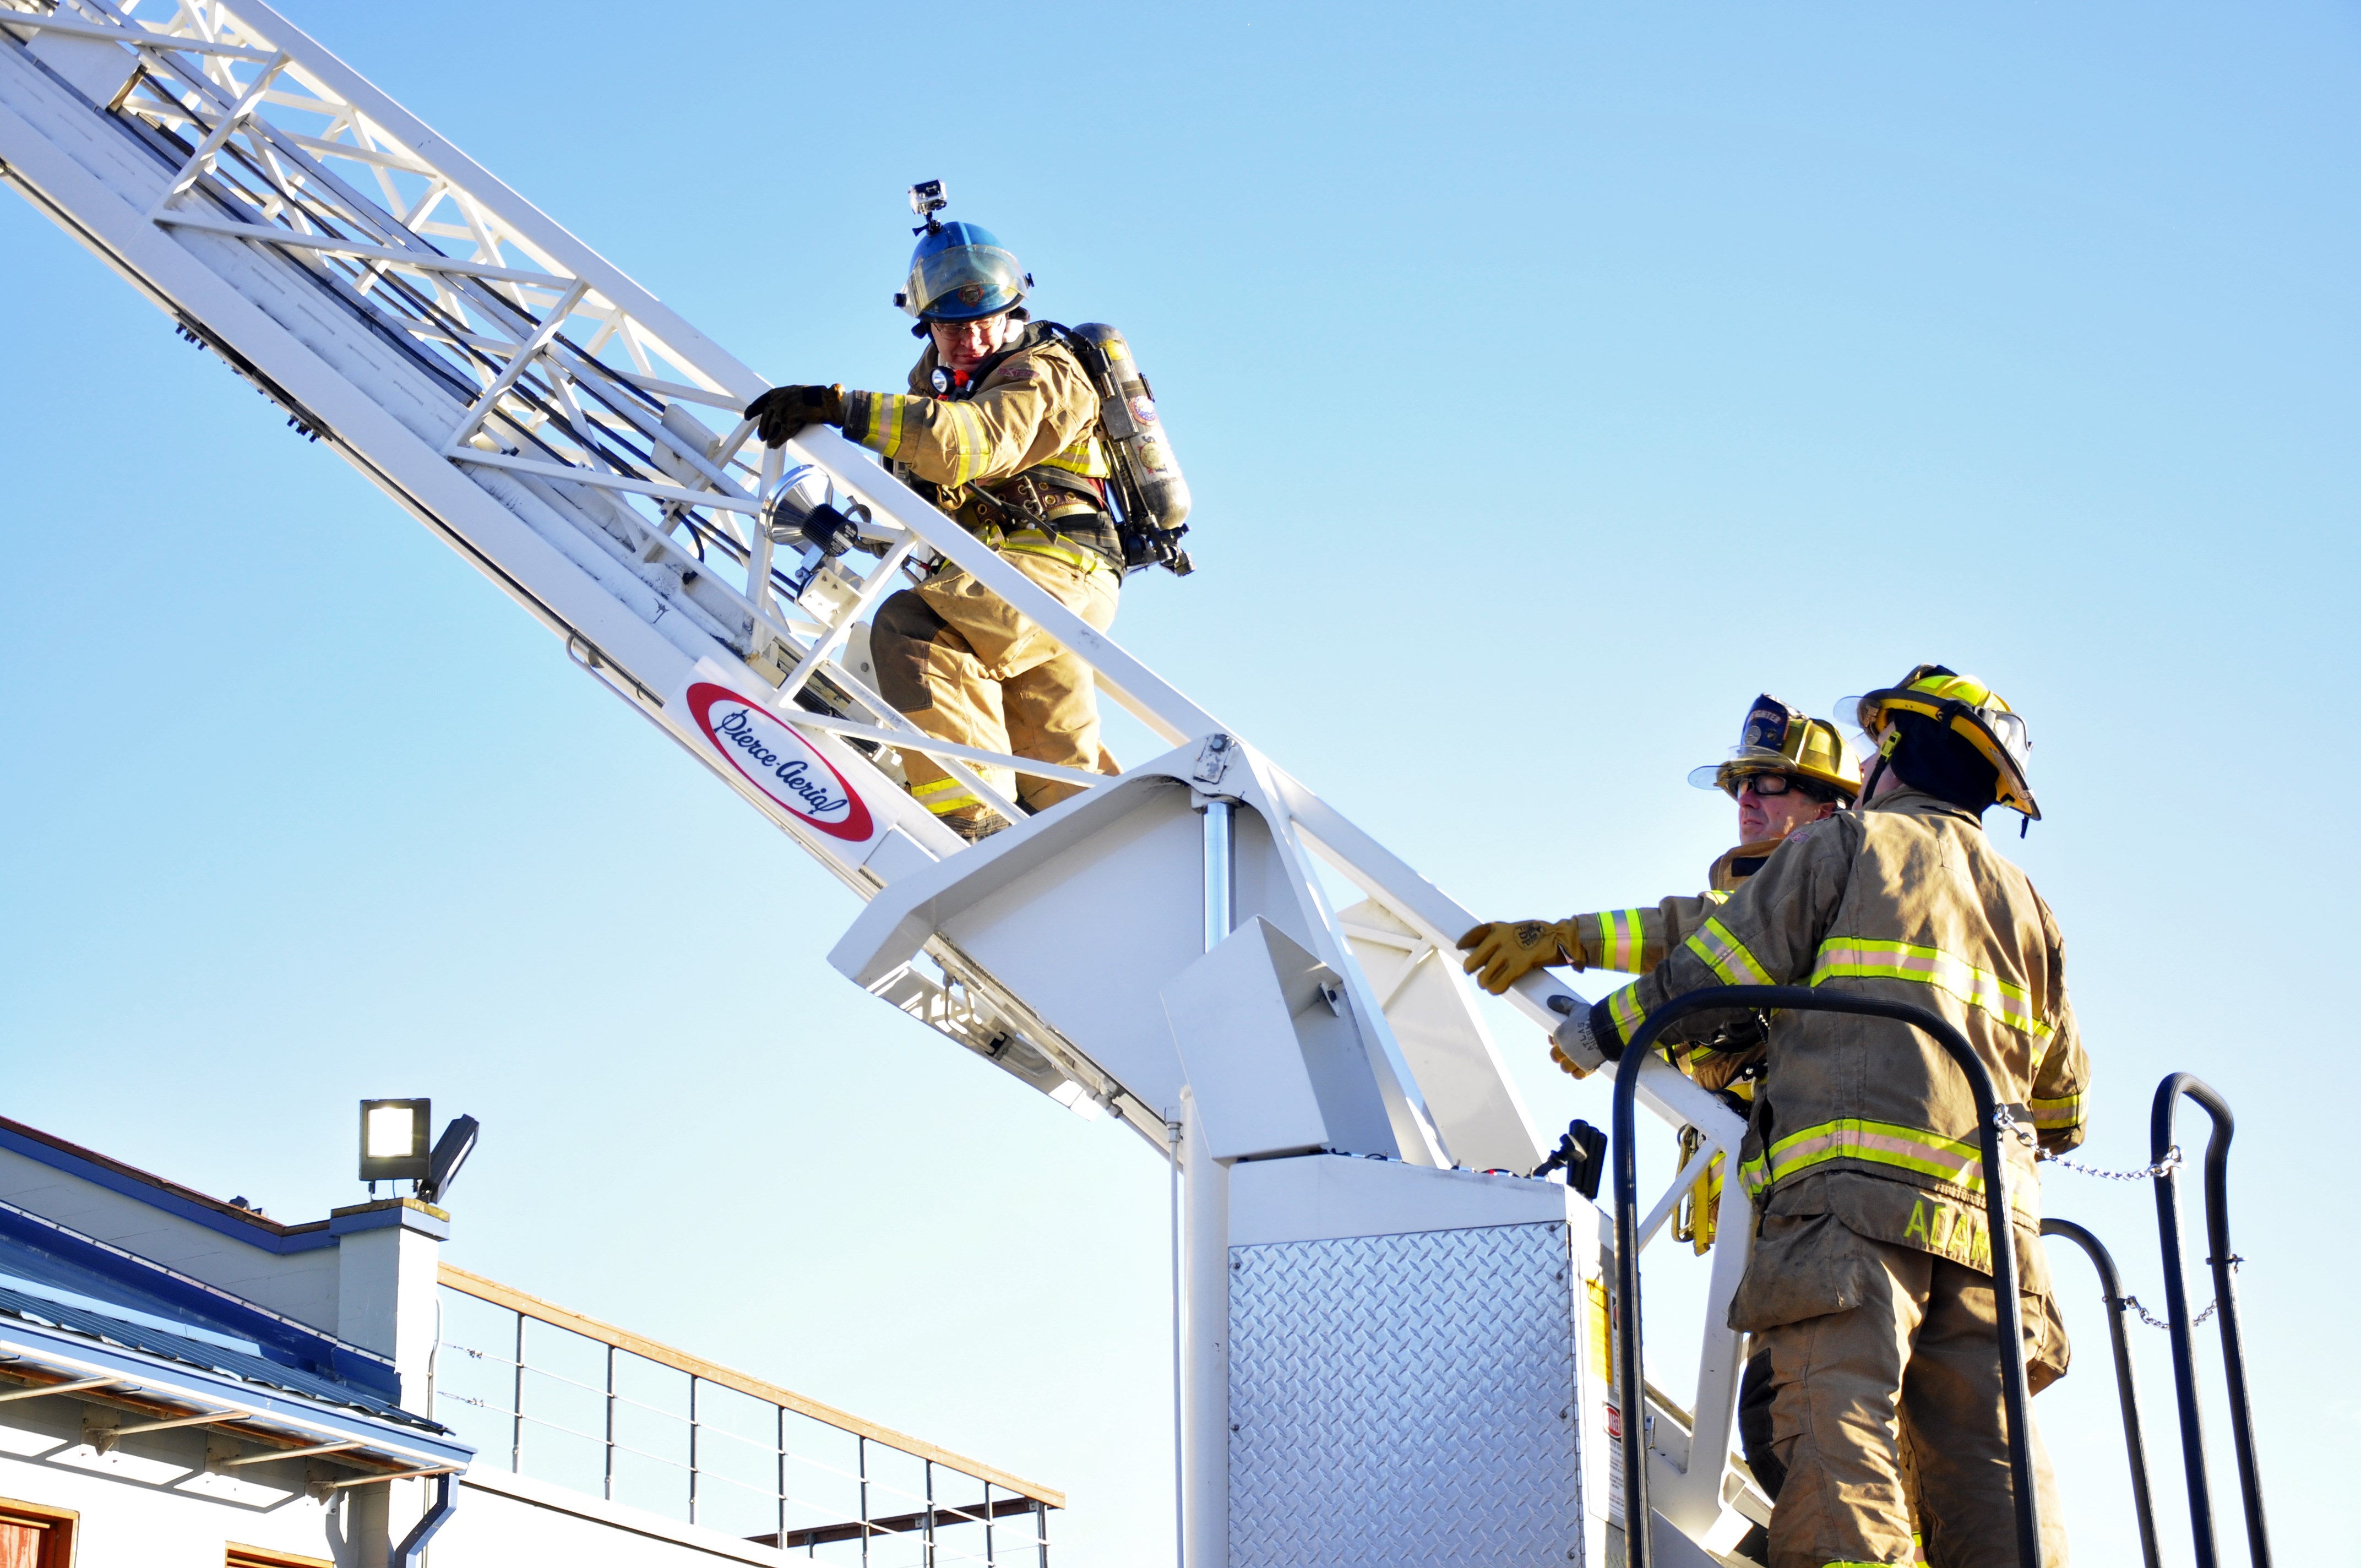 KTOO reporter Matt Miller climbs the ladder during the morning training at Hagevig Fire Training Center. Photo by Annie Bartholomew/KTOO